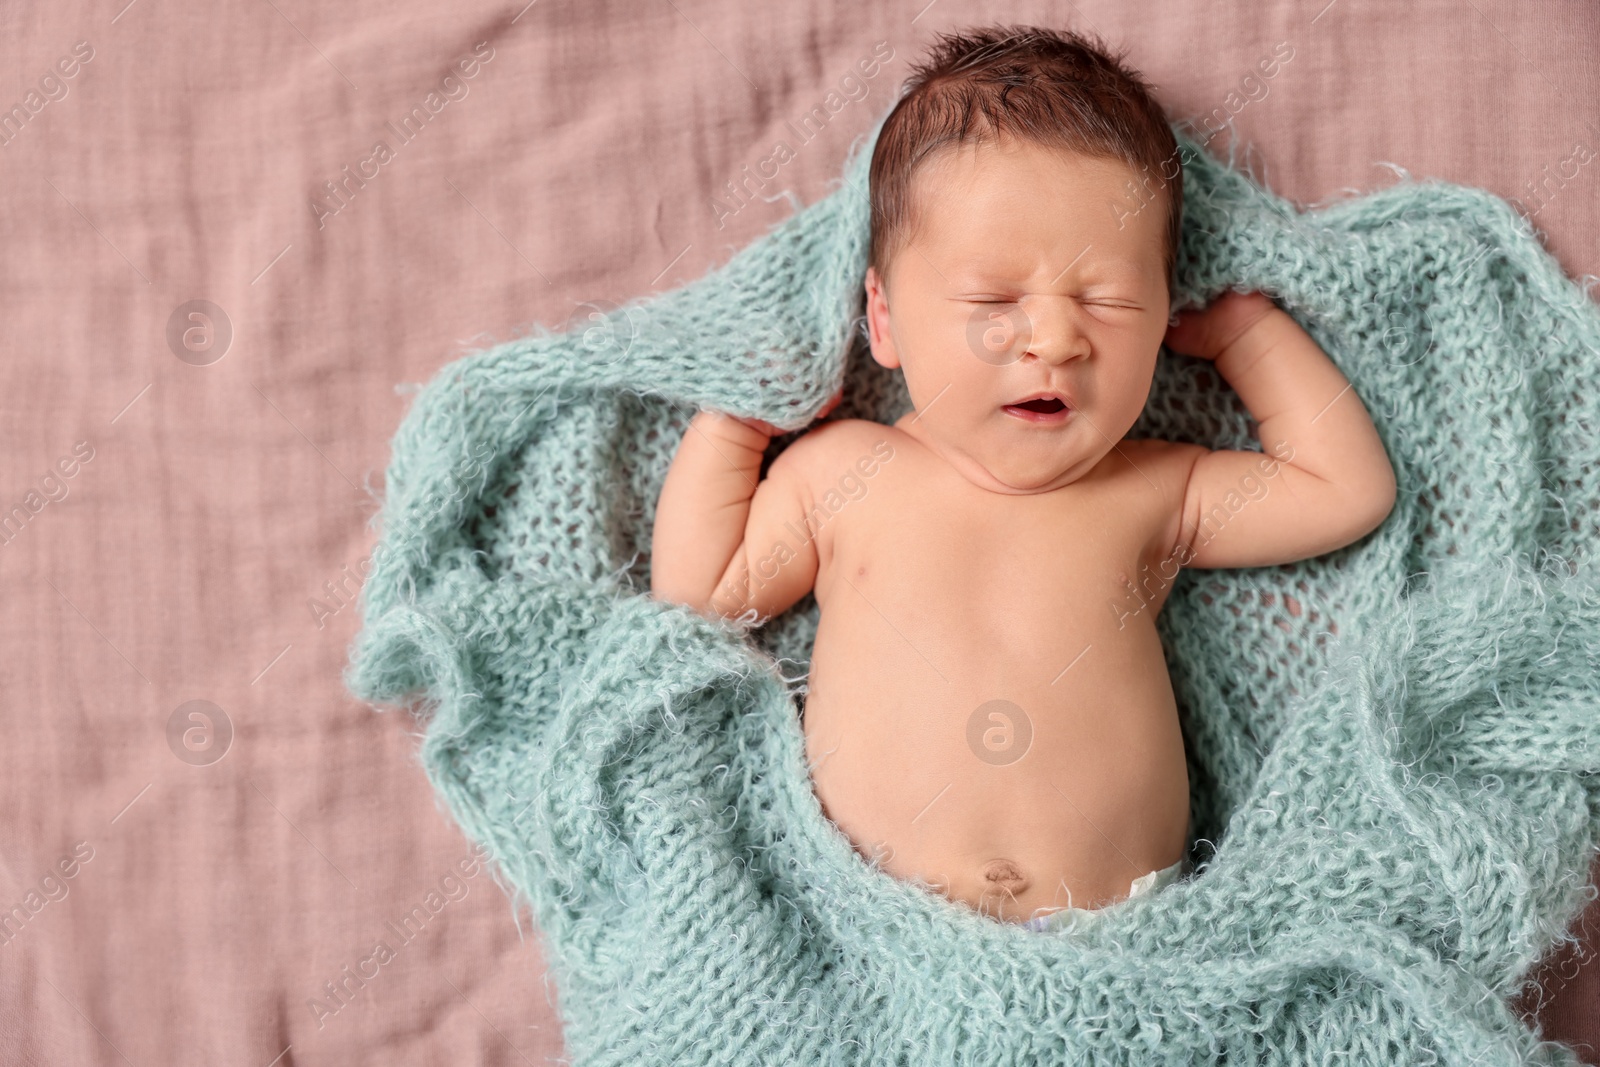 Photo of Cute newborn baby in turquoise knitted blanket yawning on bed, top view. Space for text